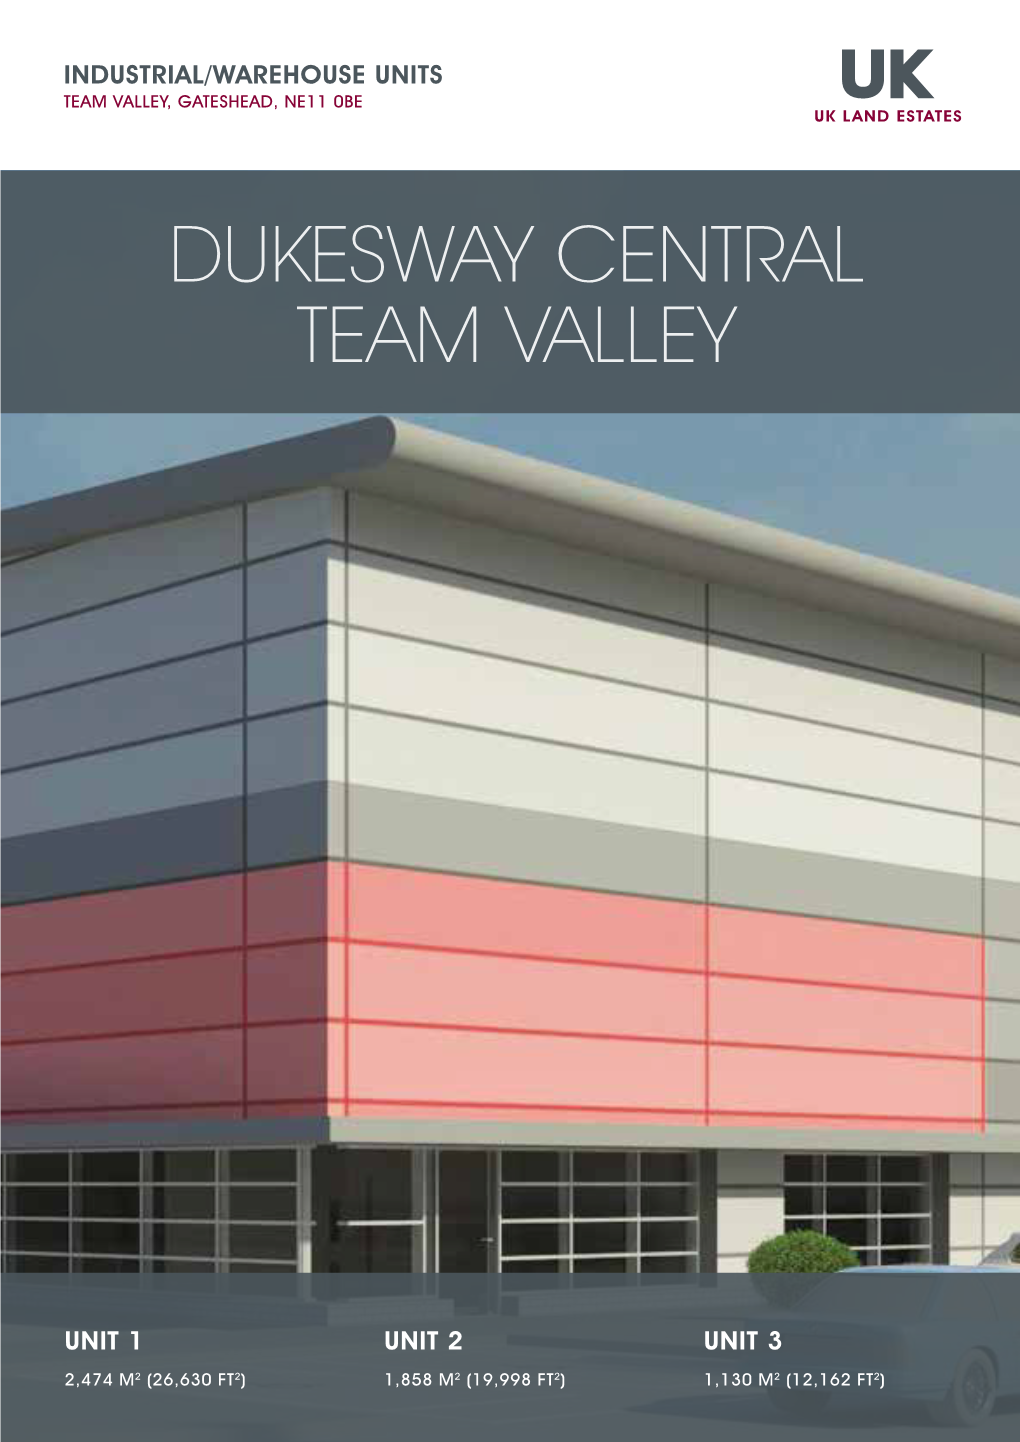 Dukesway Central Team Valley